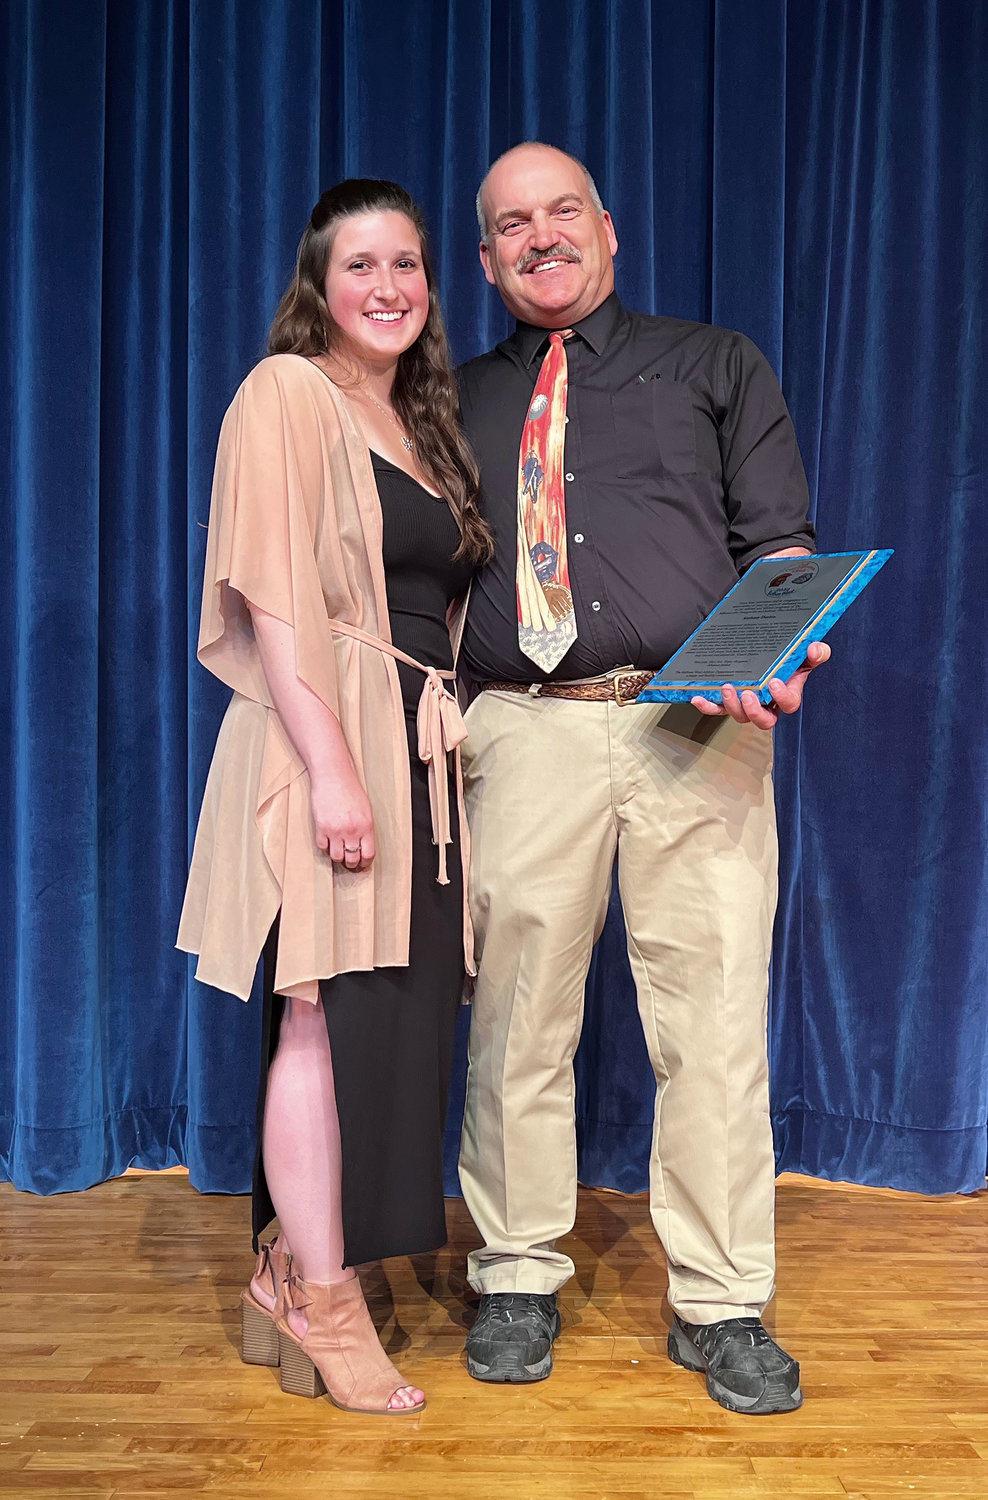 Retiring coach Anthony Durkin was the honorary recipient of a plaque attesting to his decades of great coaching and service to the school and community. It was presented to him by his daughter Elaine.